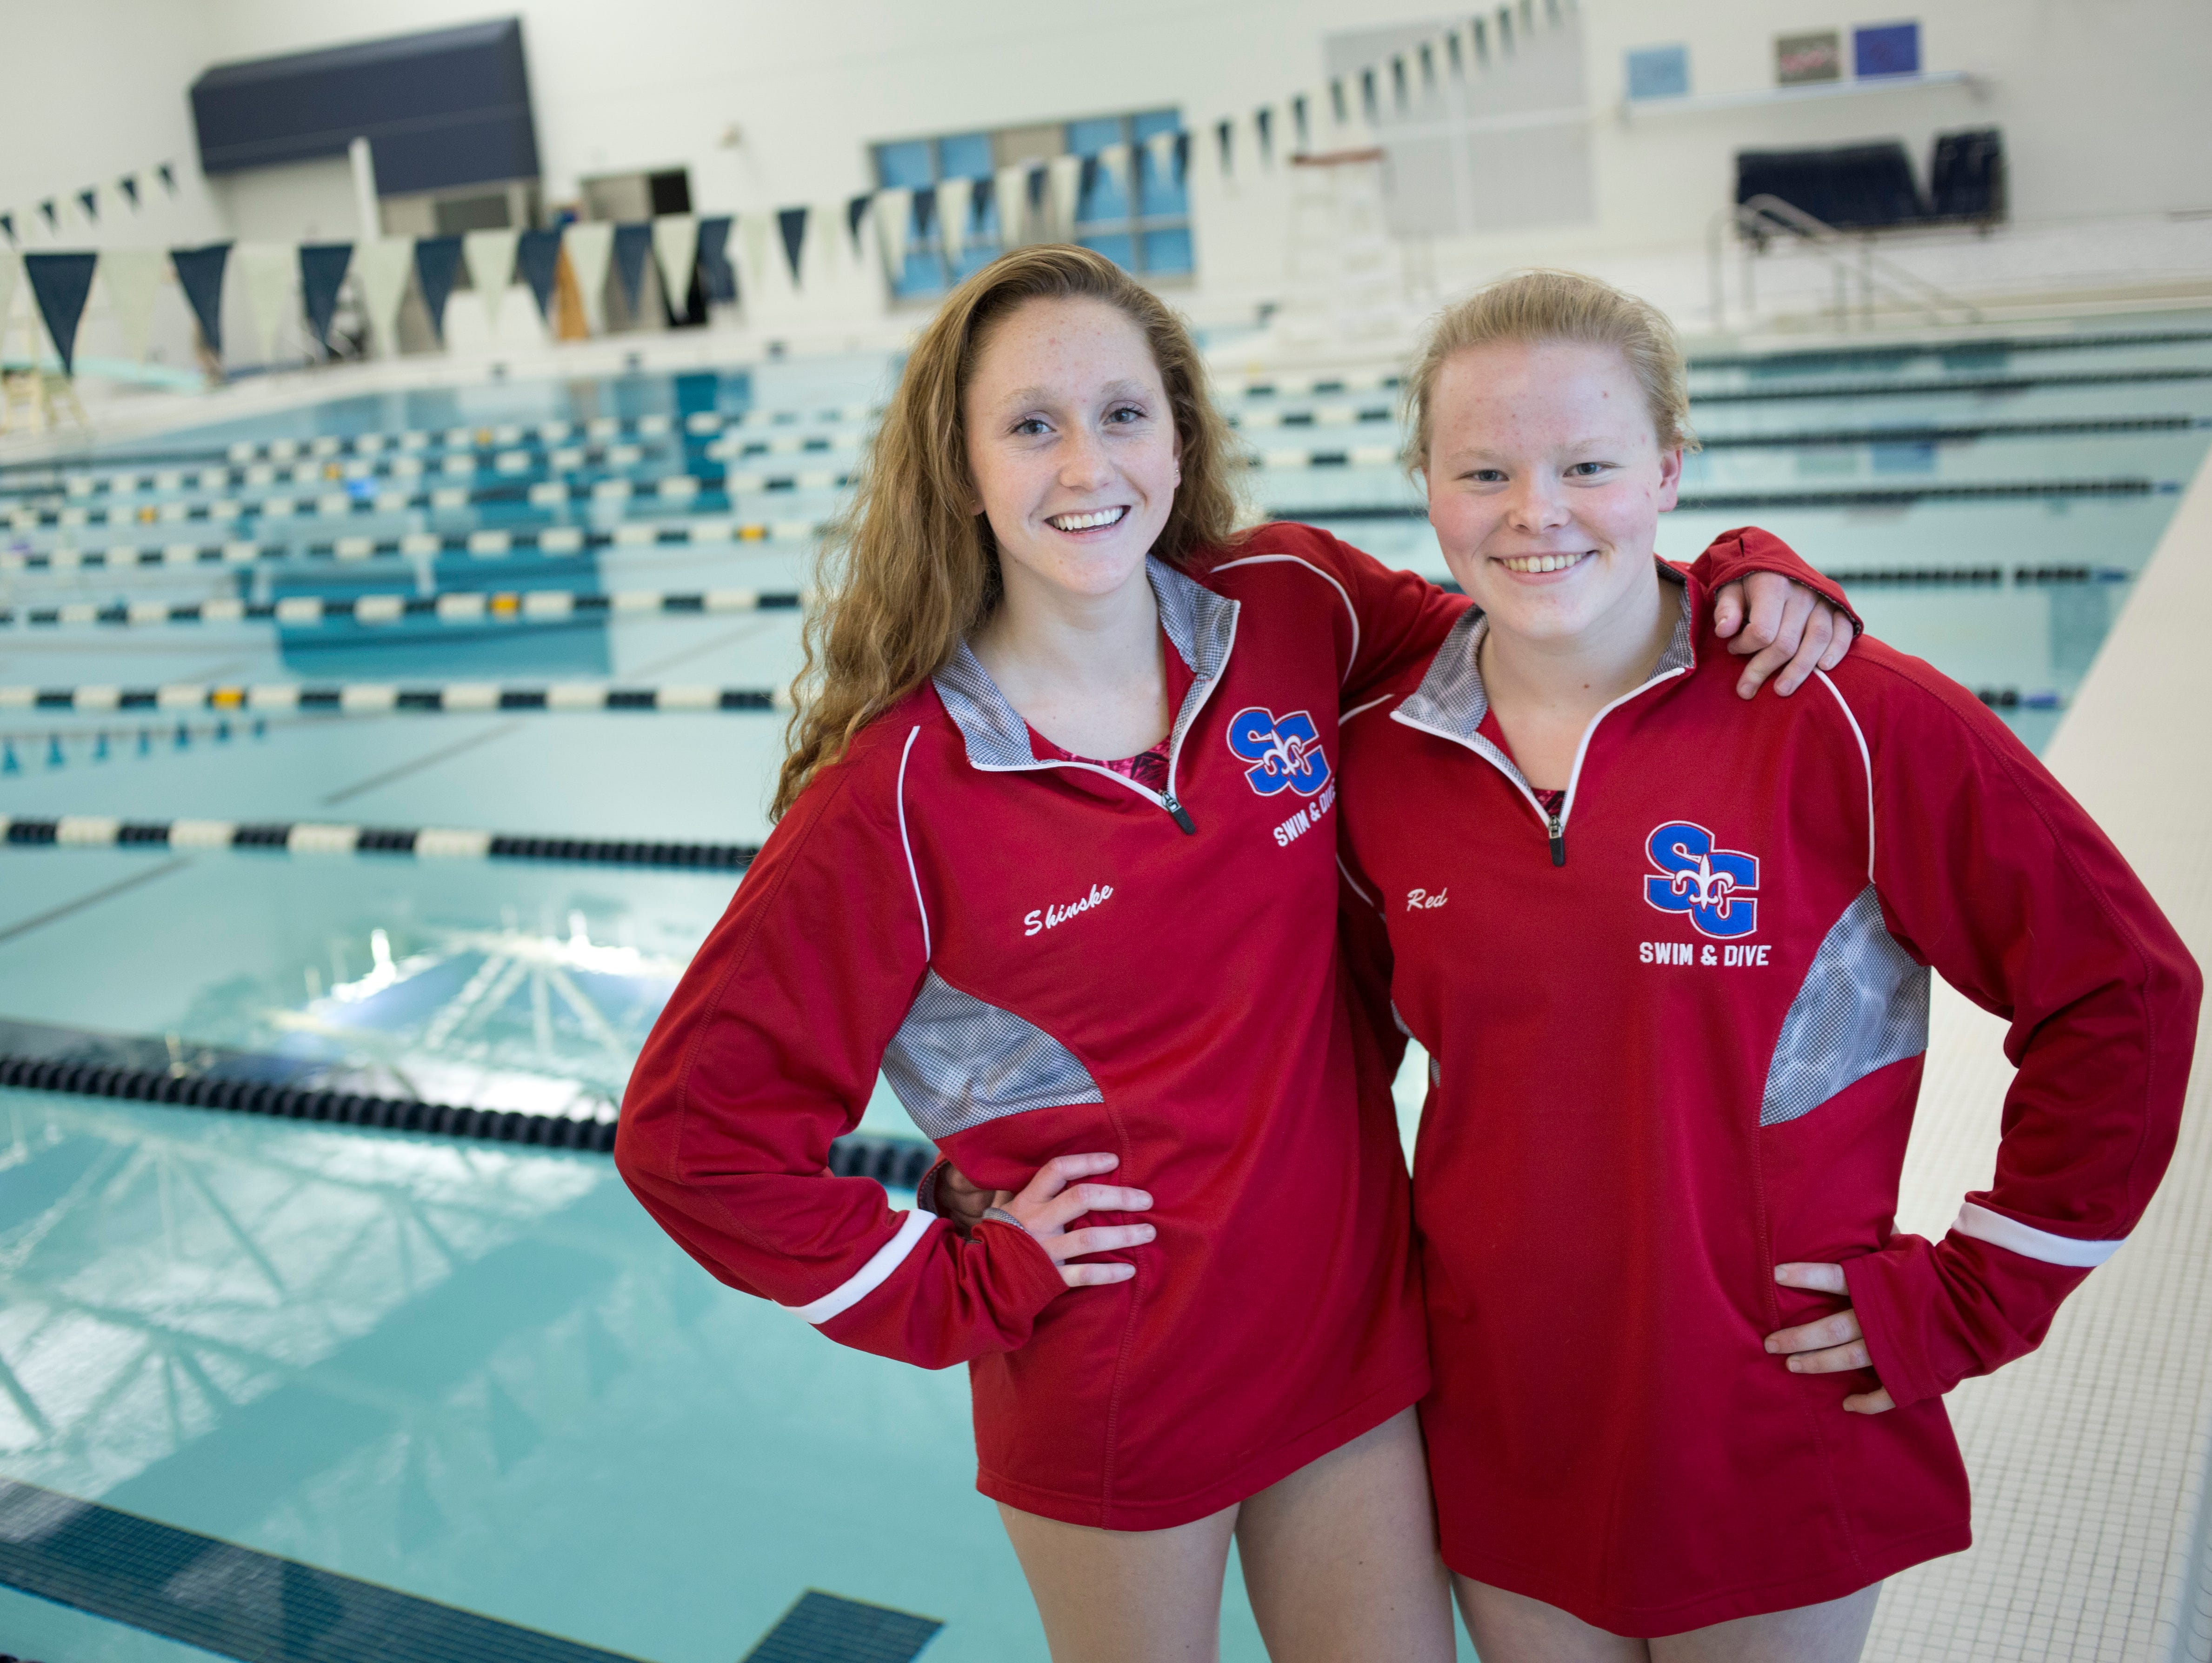 St. Clair senior Grace Shinske and Alexis Smith pose before practice Wednesday, November 18, 2015 in Marysville. The team will be competing in a state meet this weekend.